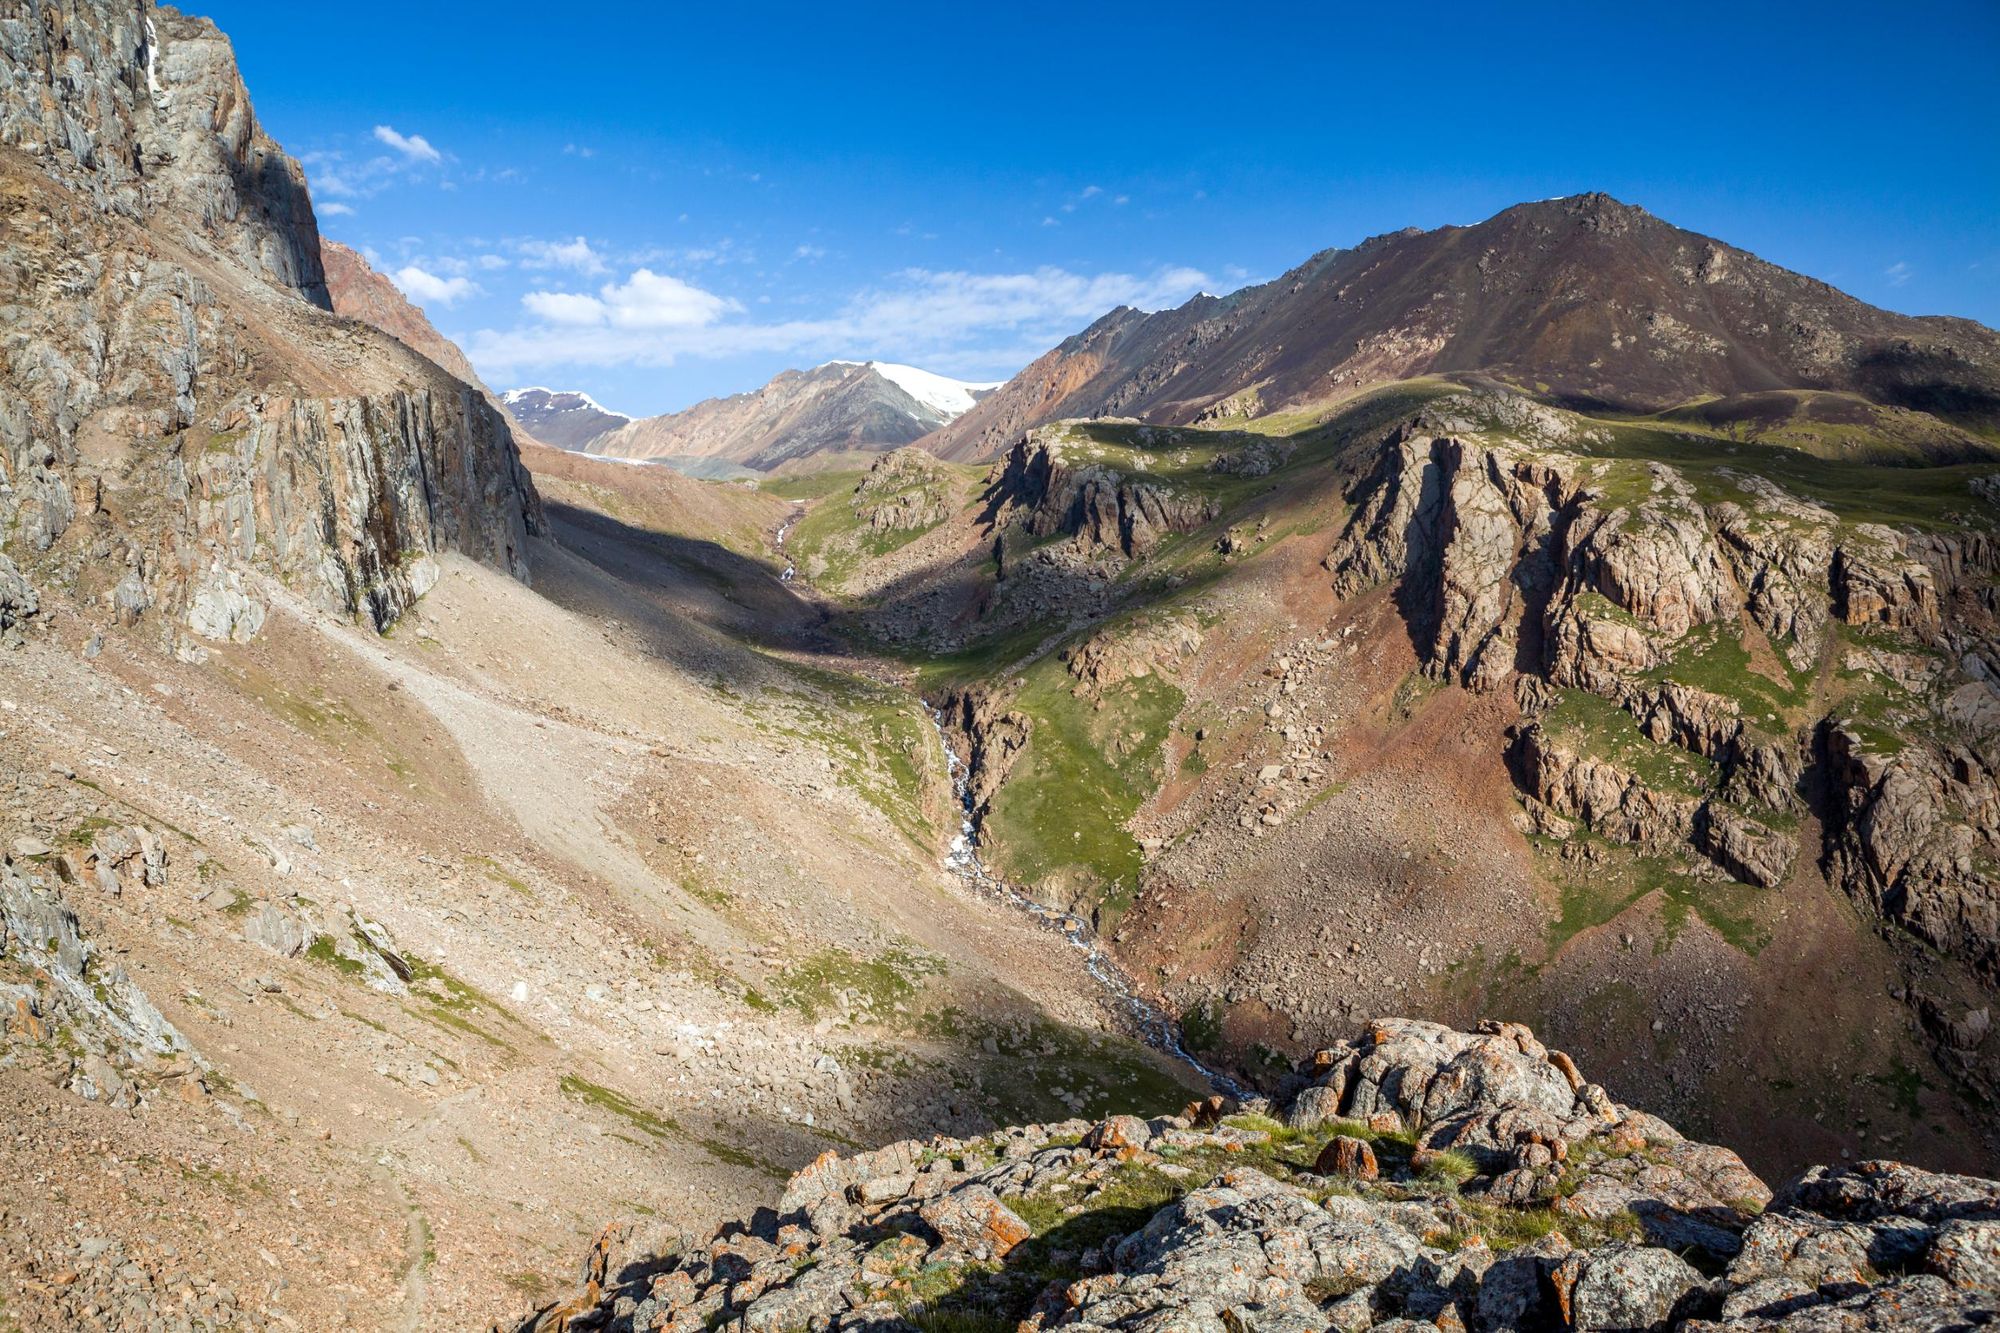 The view from Jukku Pass in the Tian Shan mountains, Kyrgyzstan. Photo: Getty